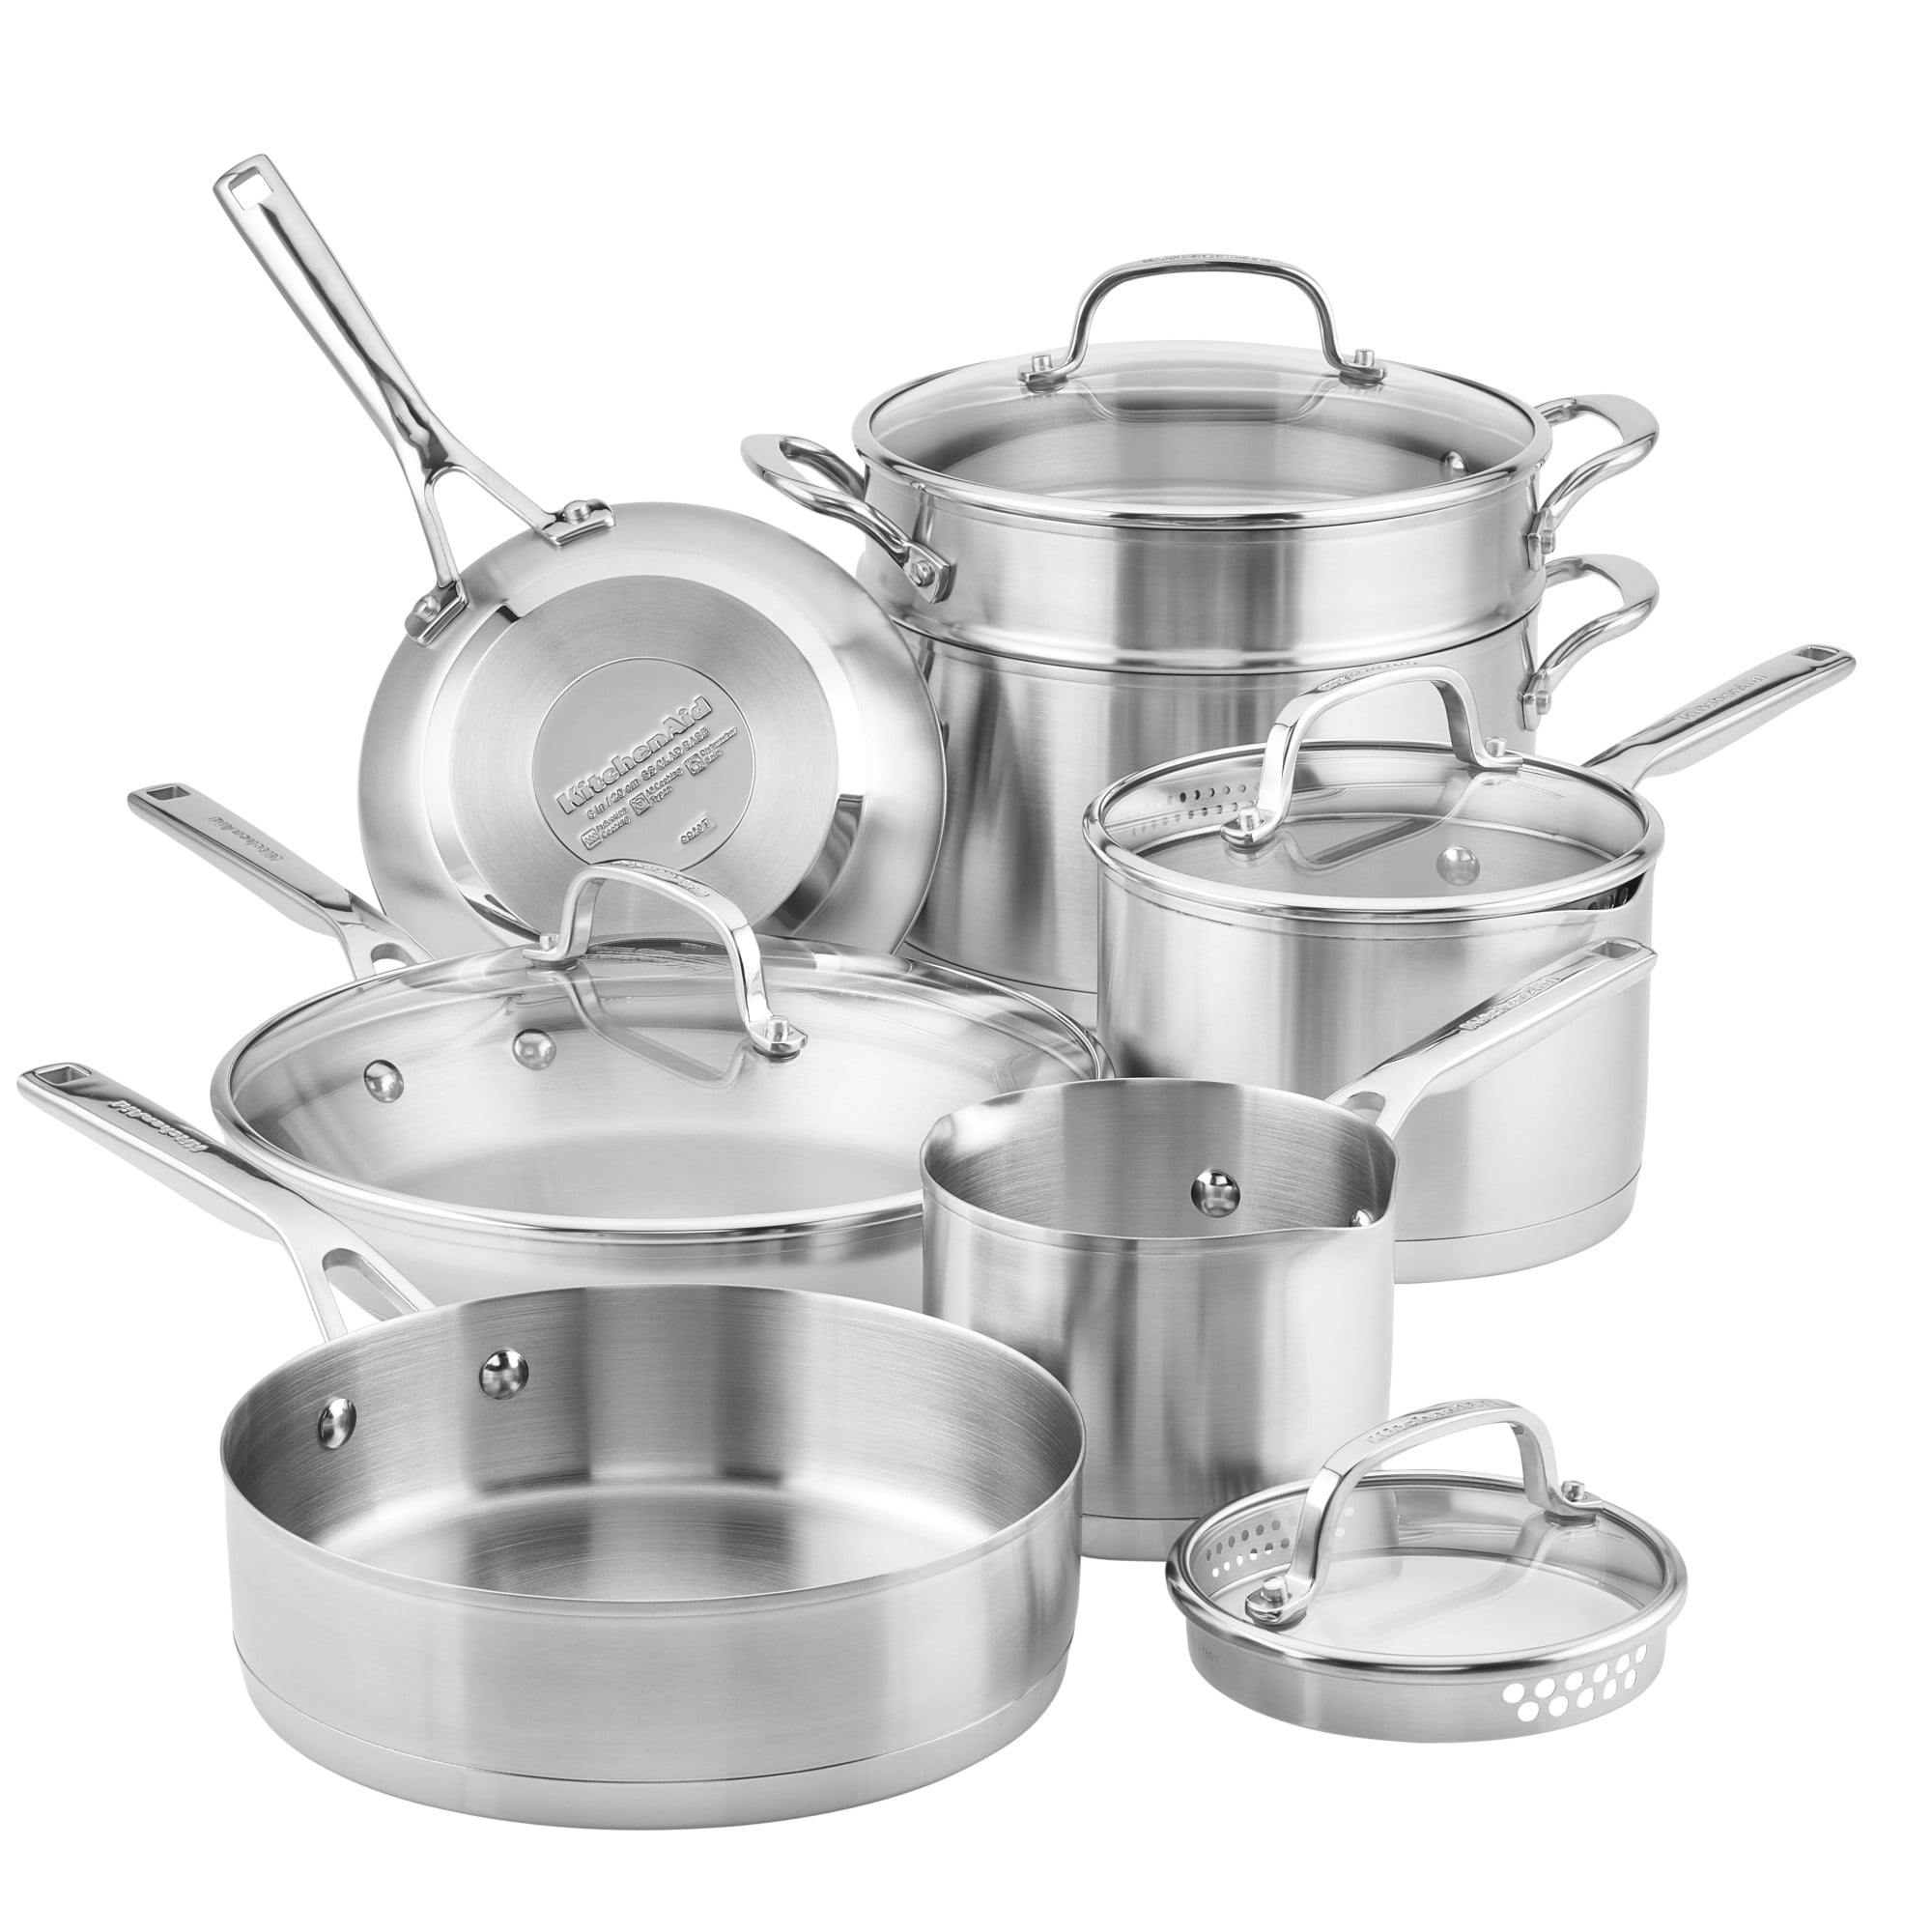 Details about   12 Pieces Gourmet TriPly Clad Cookware Set Cooking Pots And Pans Stainless Steel 